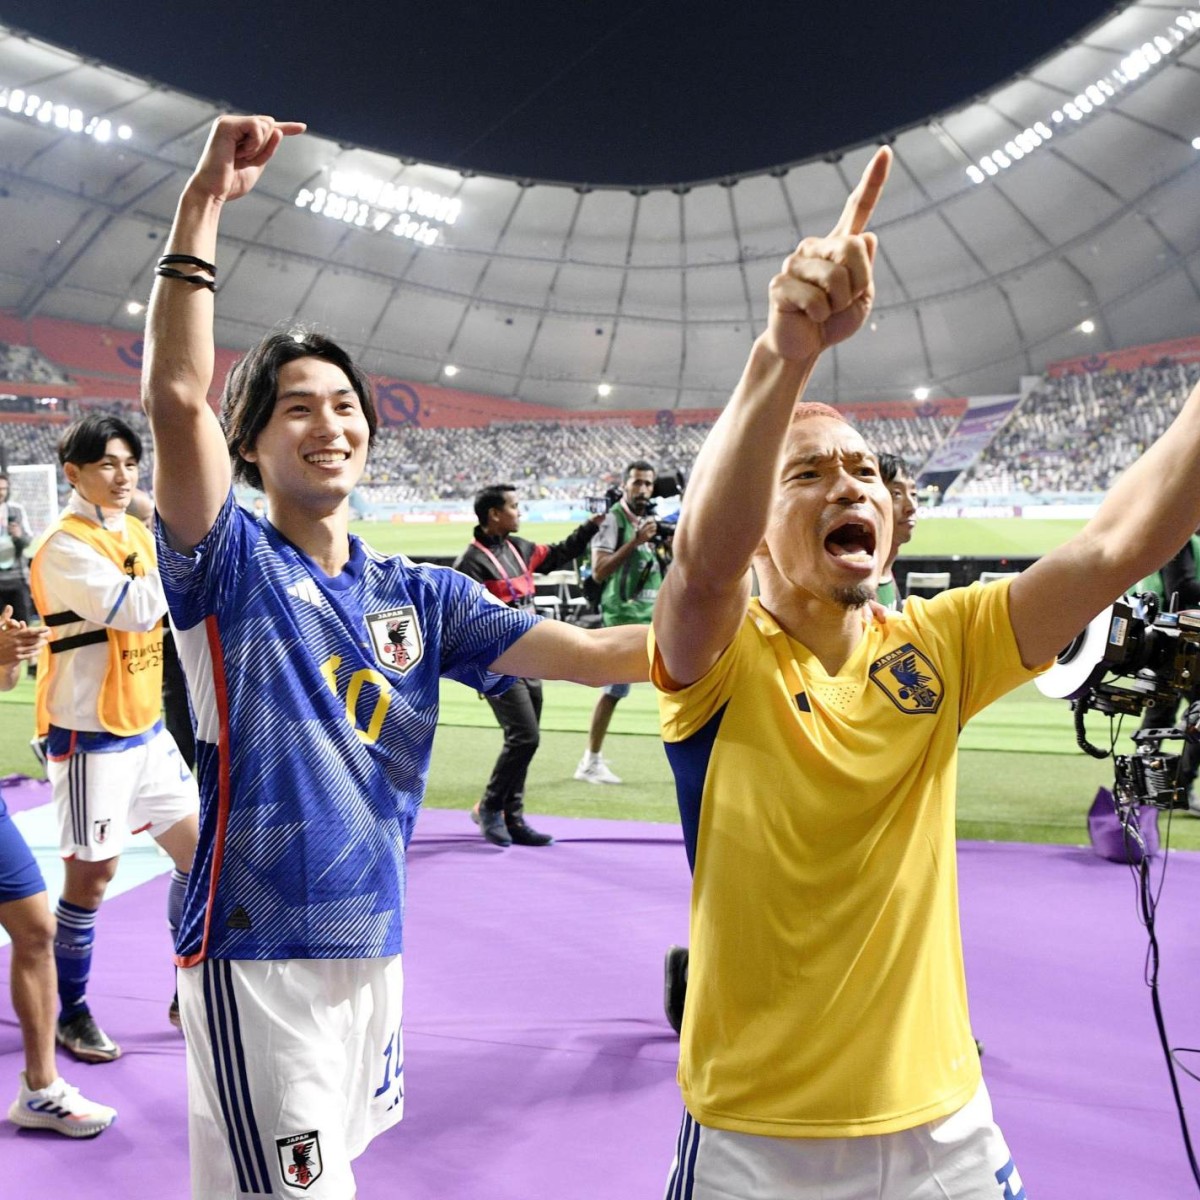 ABEMA to Broadcast All 64 Matches of the FIFA World Cup Qatar 2022 for the  First Time in Japan, Live and Free of Charge